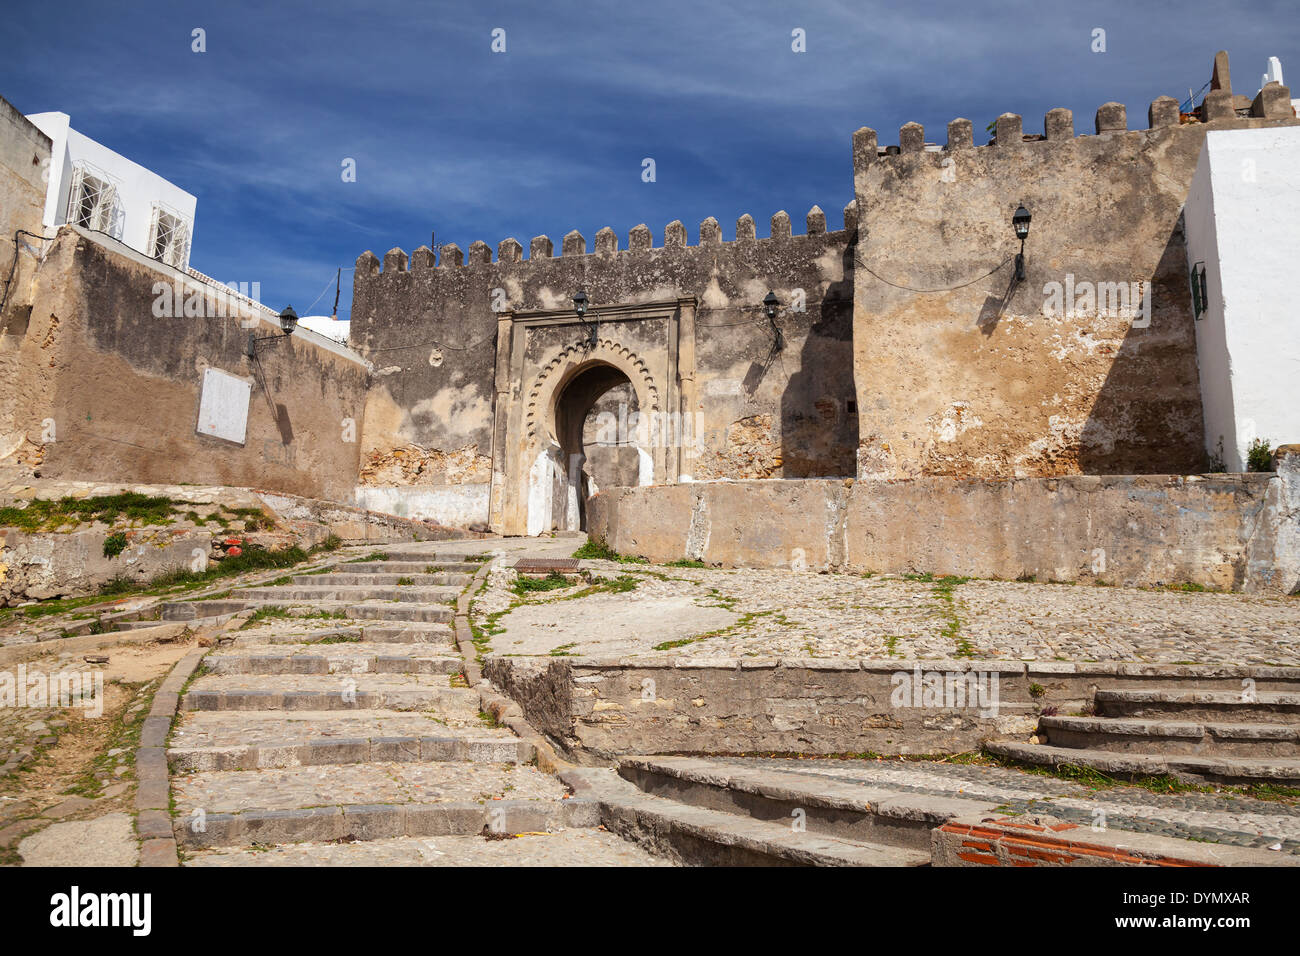 Ancient stone fortress in Madina. Old part of Tangier town, Morocco Stock Photo